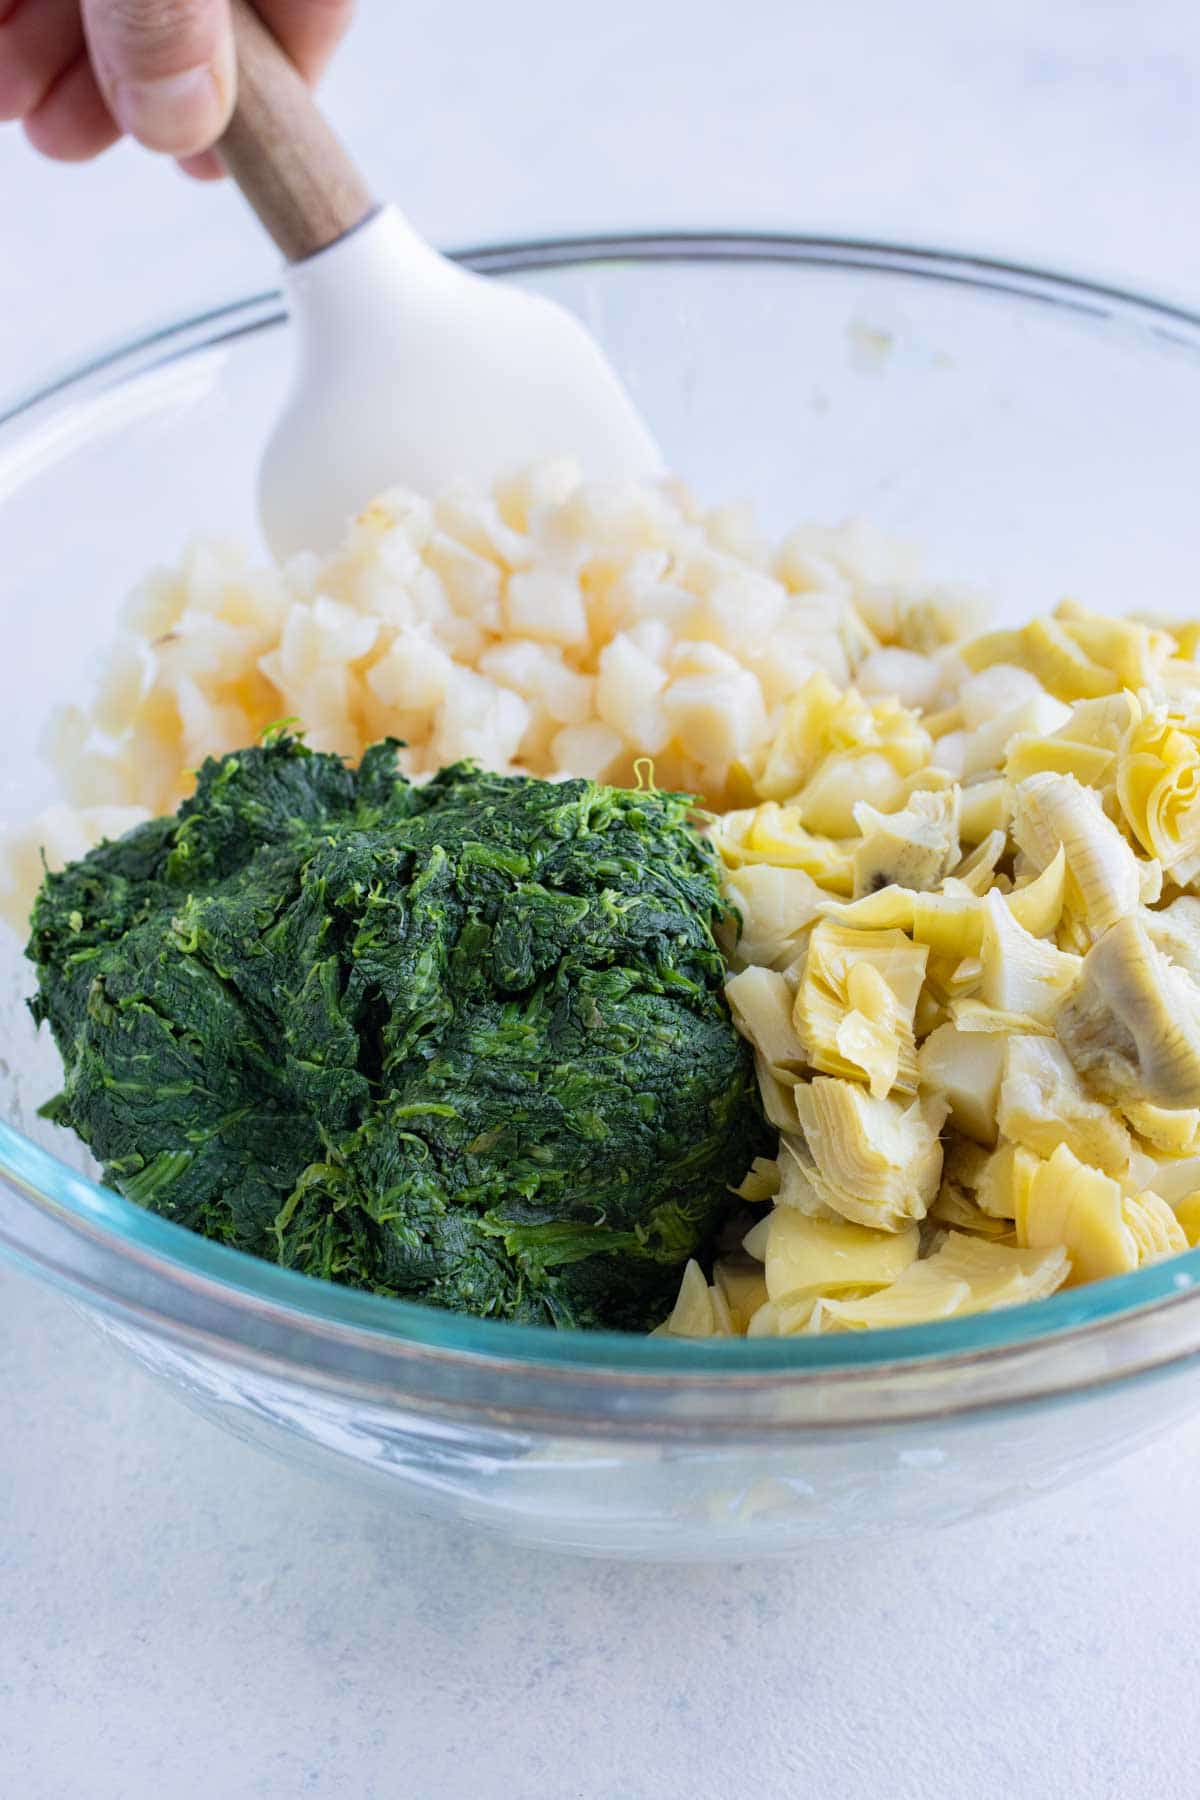 Spinach, water chestnuts, and artichokes are added to the mixture.